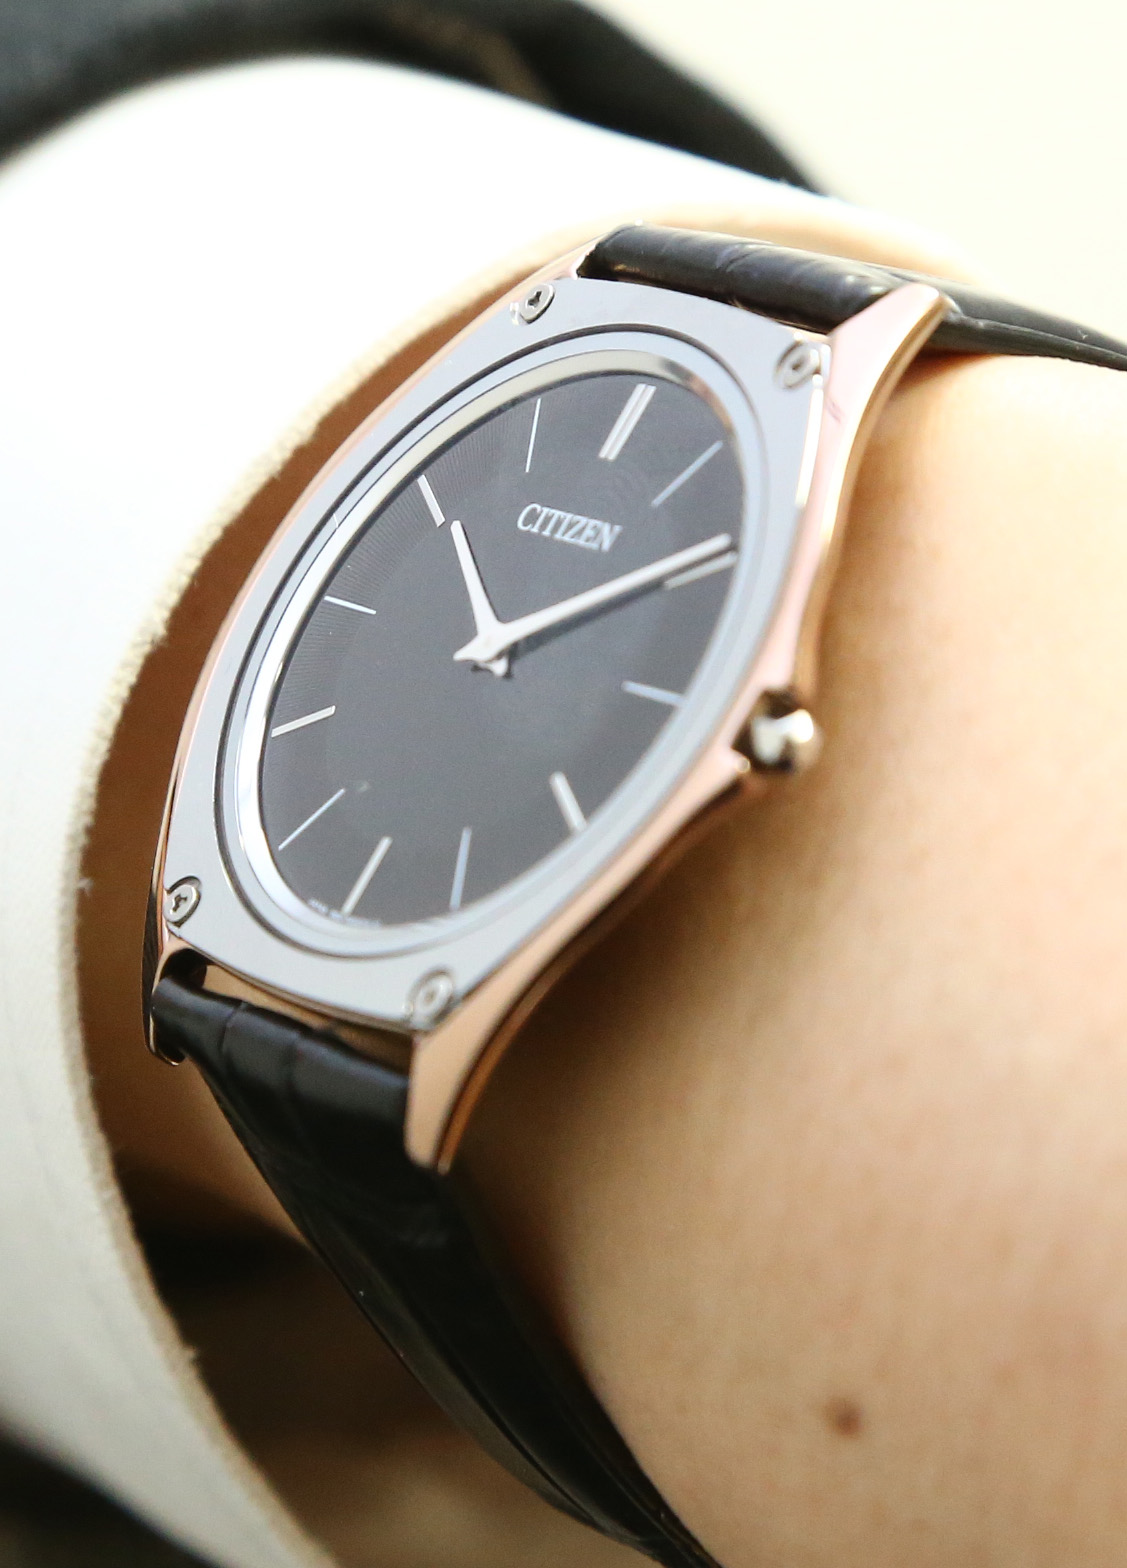 Eco-Drive One Watches - Our Thinnest Light-Powered Watch.